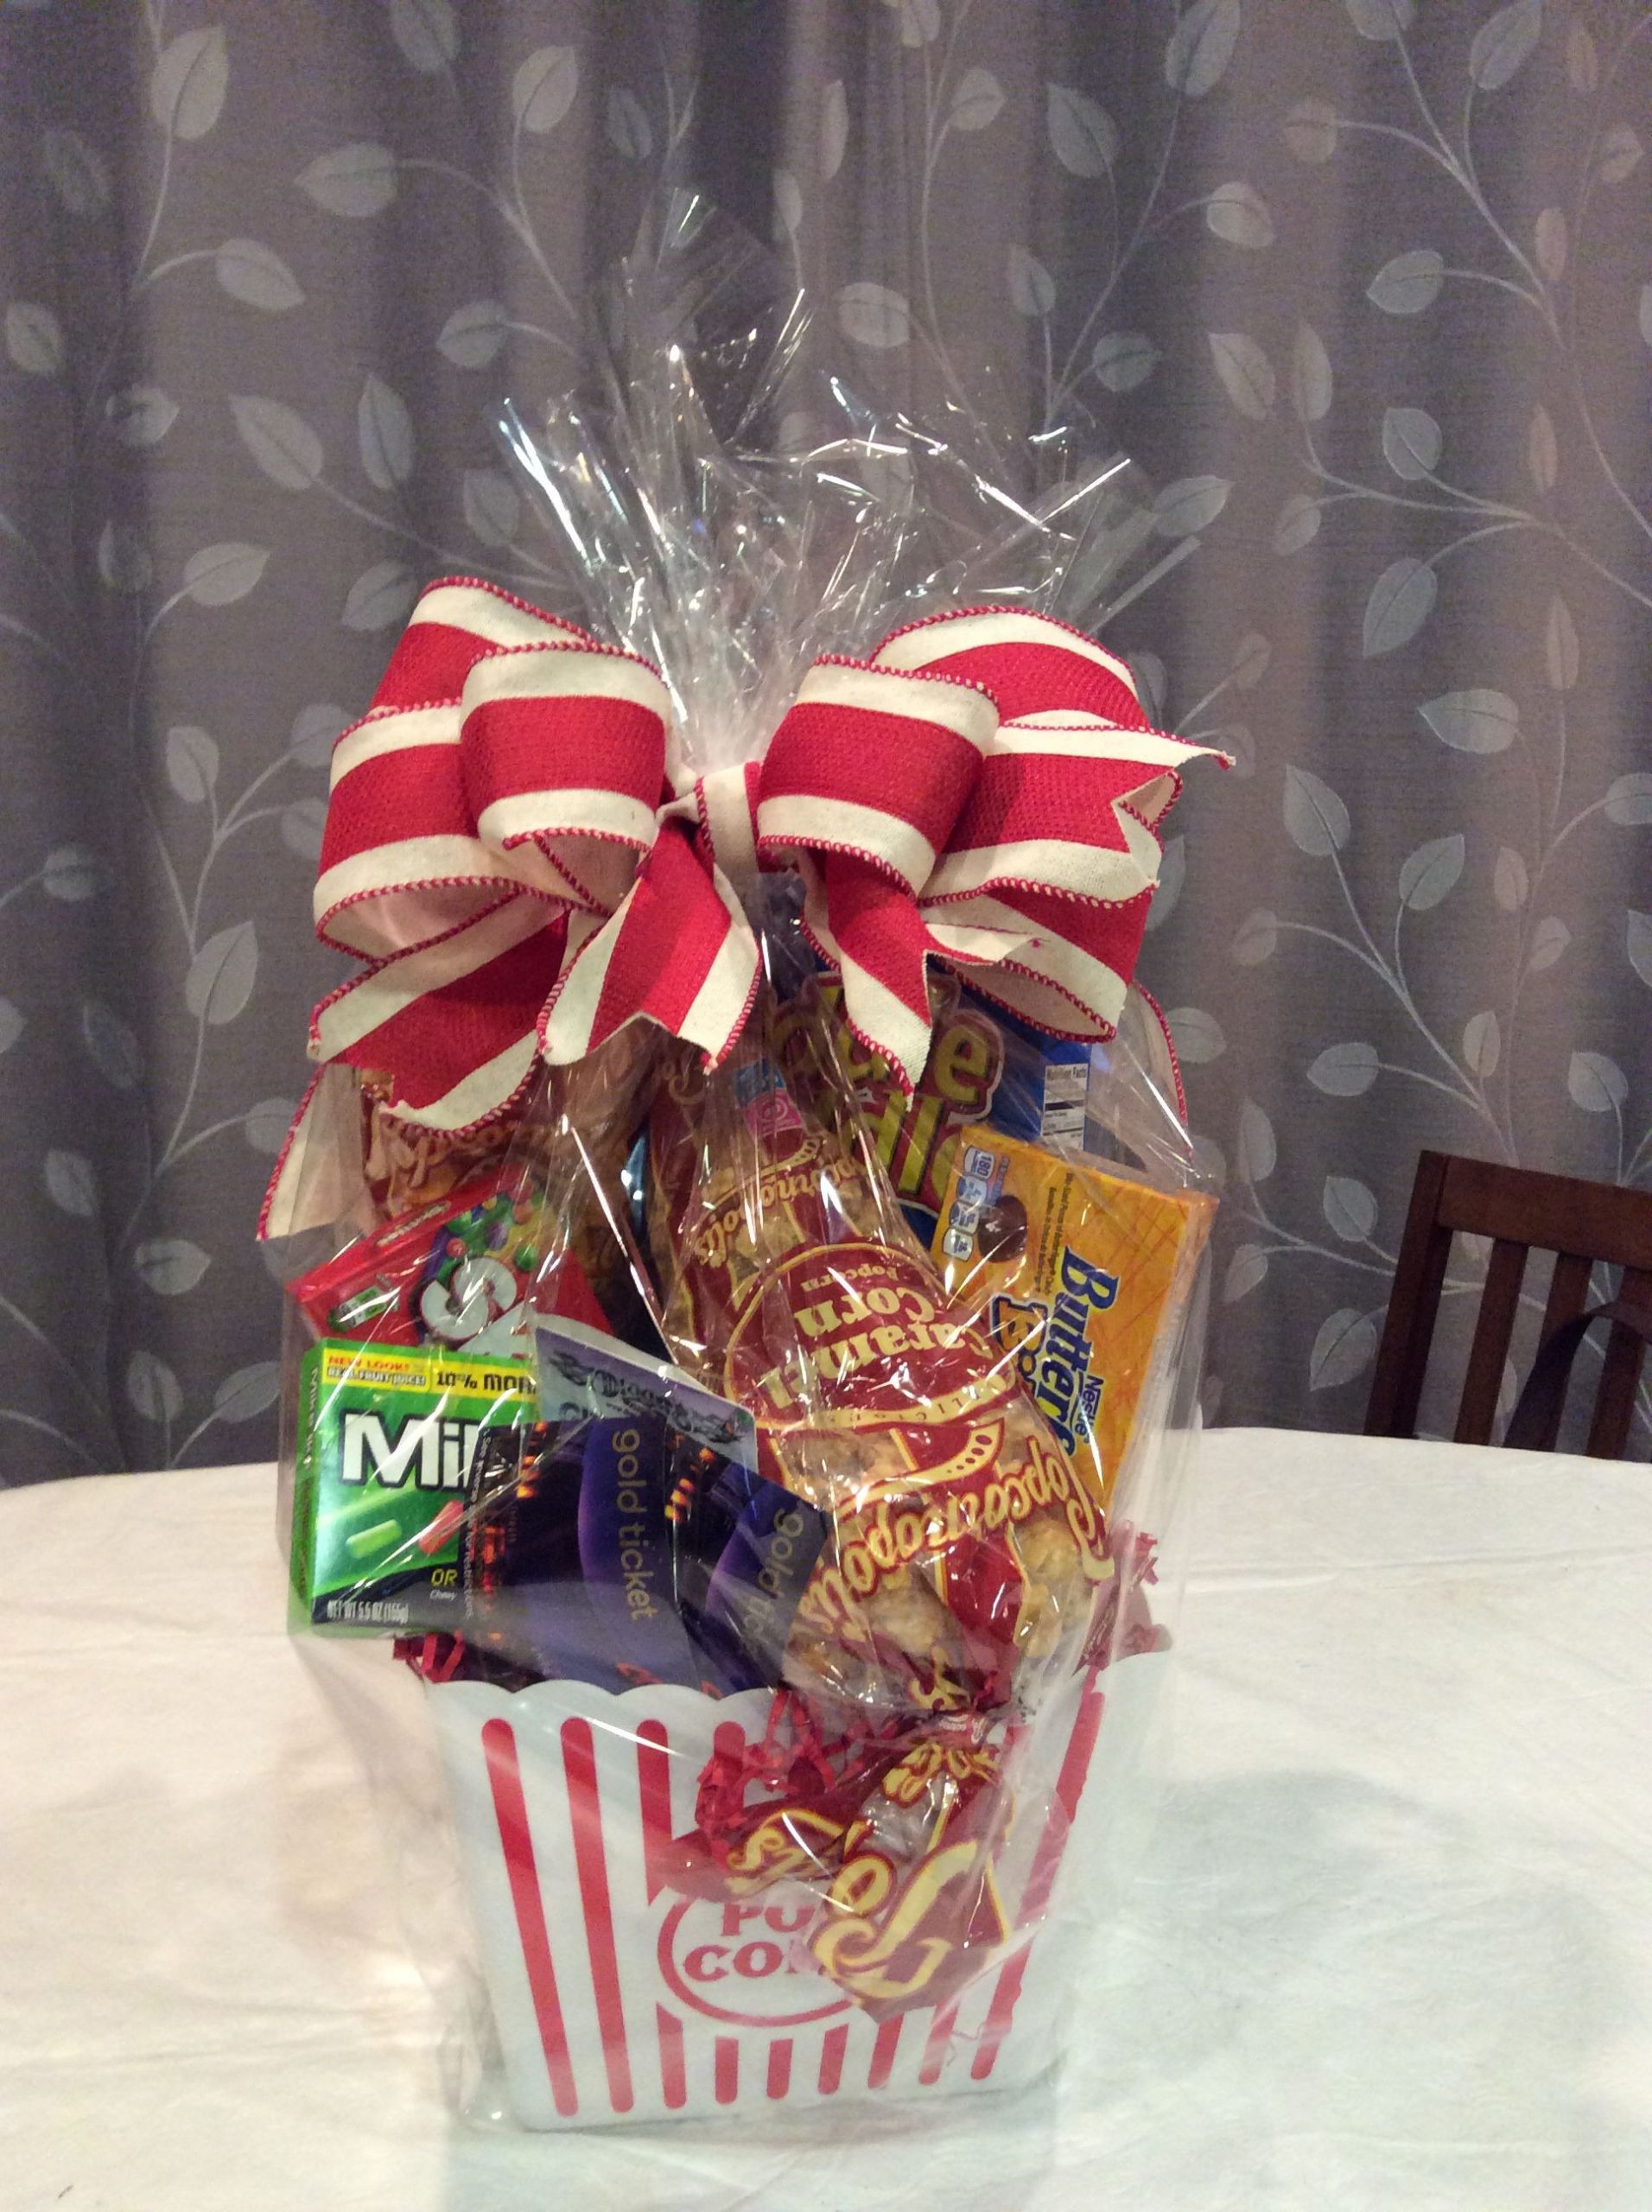 Movie Ticket Gift Basket Ideas
 Dinner and a movie basket with 2 movie tickets and t